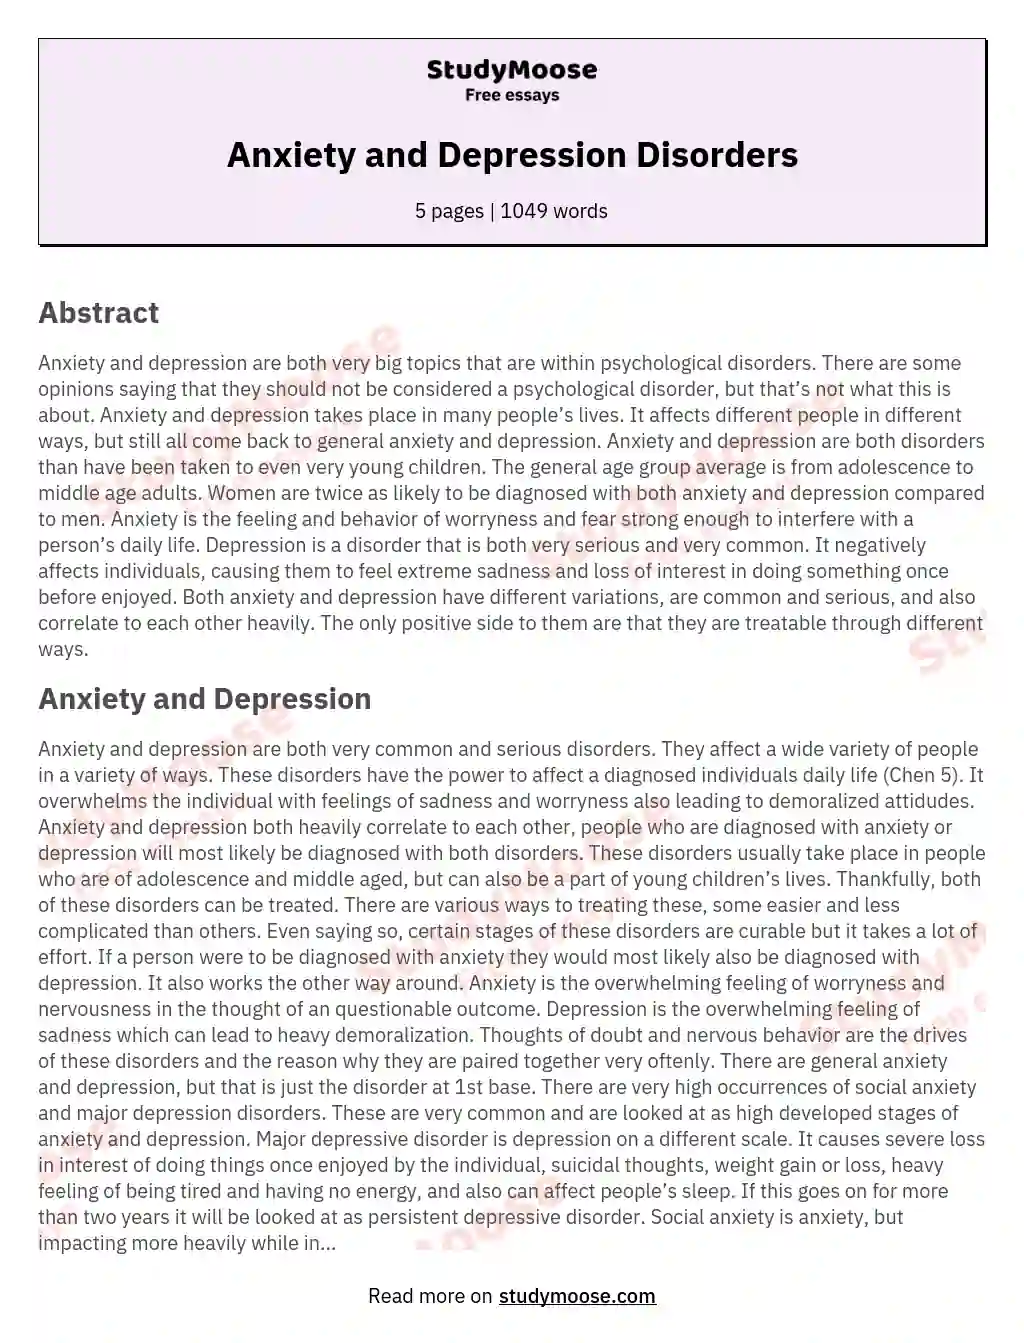 Anxiety and Depression Disorders essay